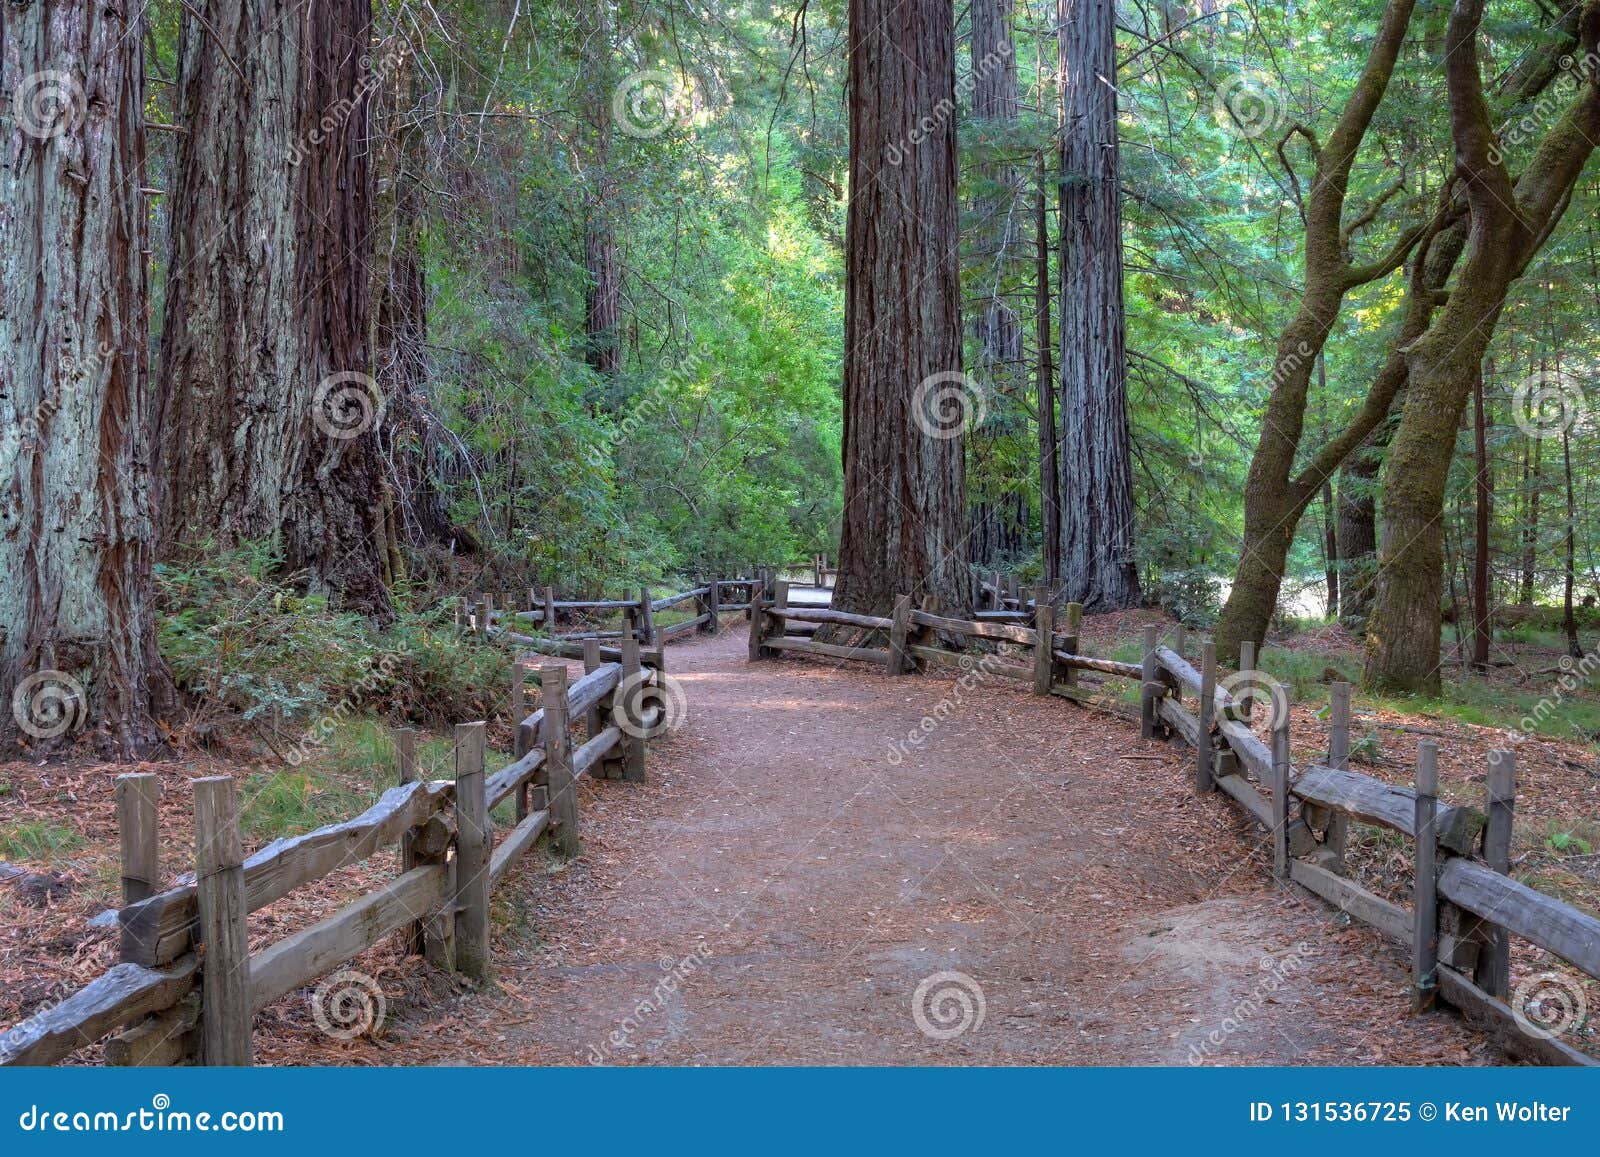 path through giant redwood forest at big basin state park, california, usa